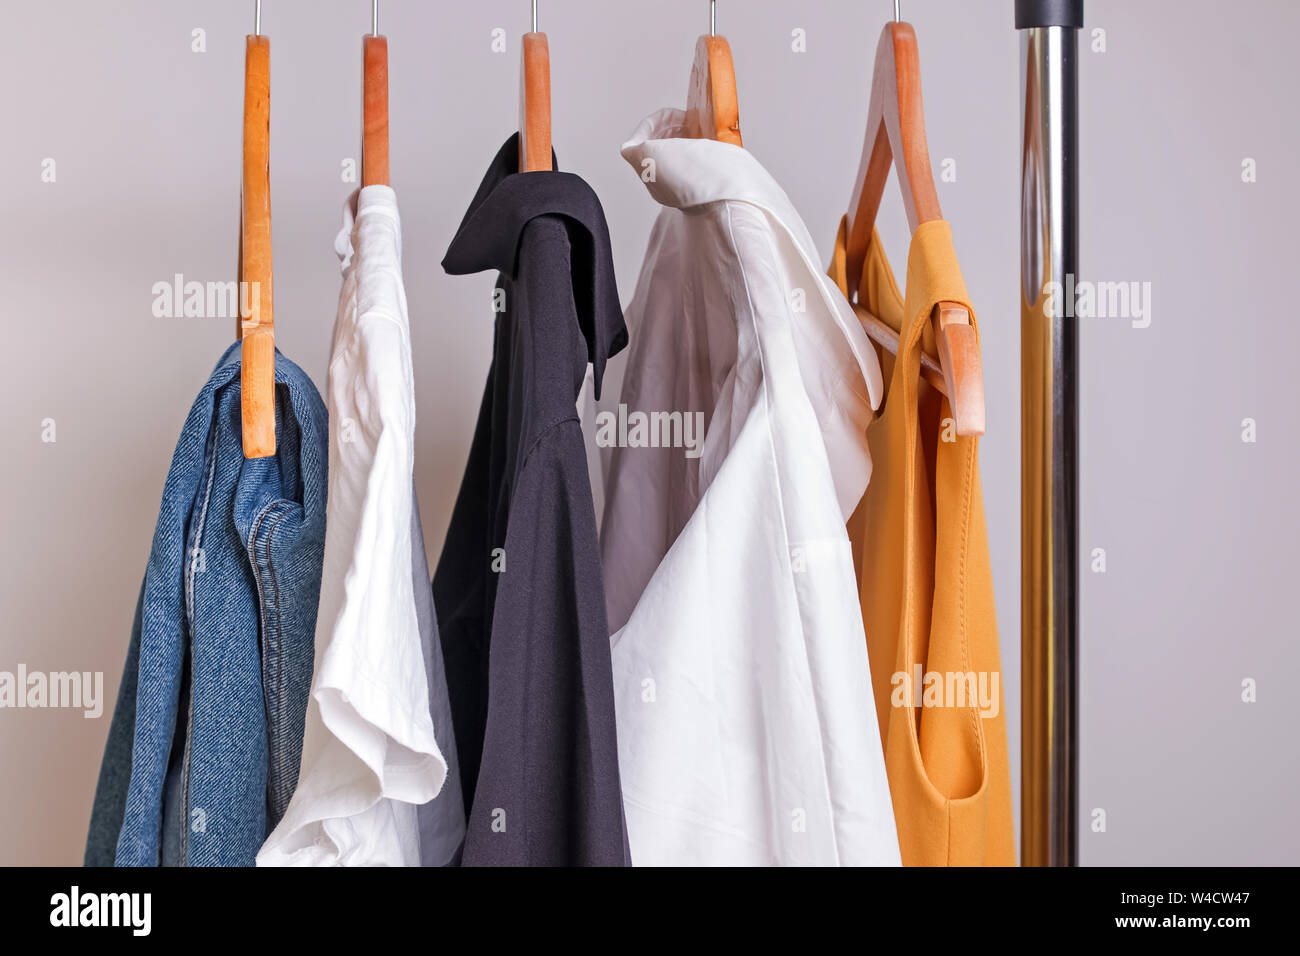 Woman minimalist wardrobe in white and denim on hangers close-up Stock Photo